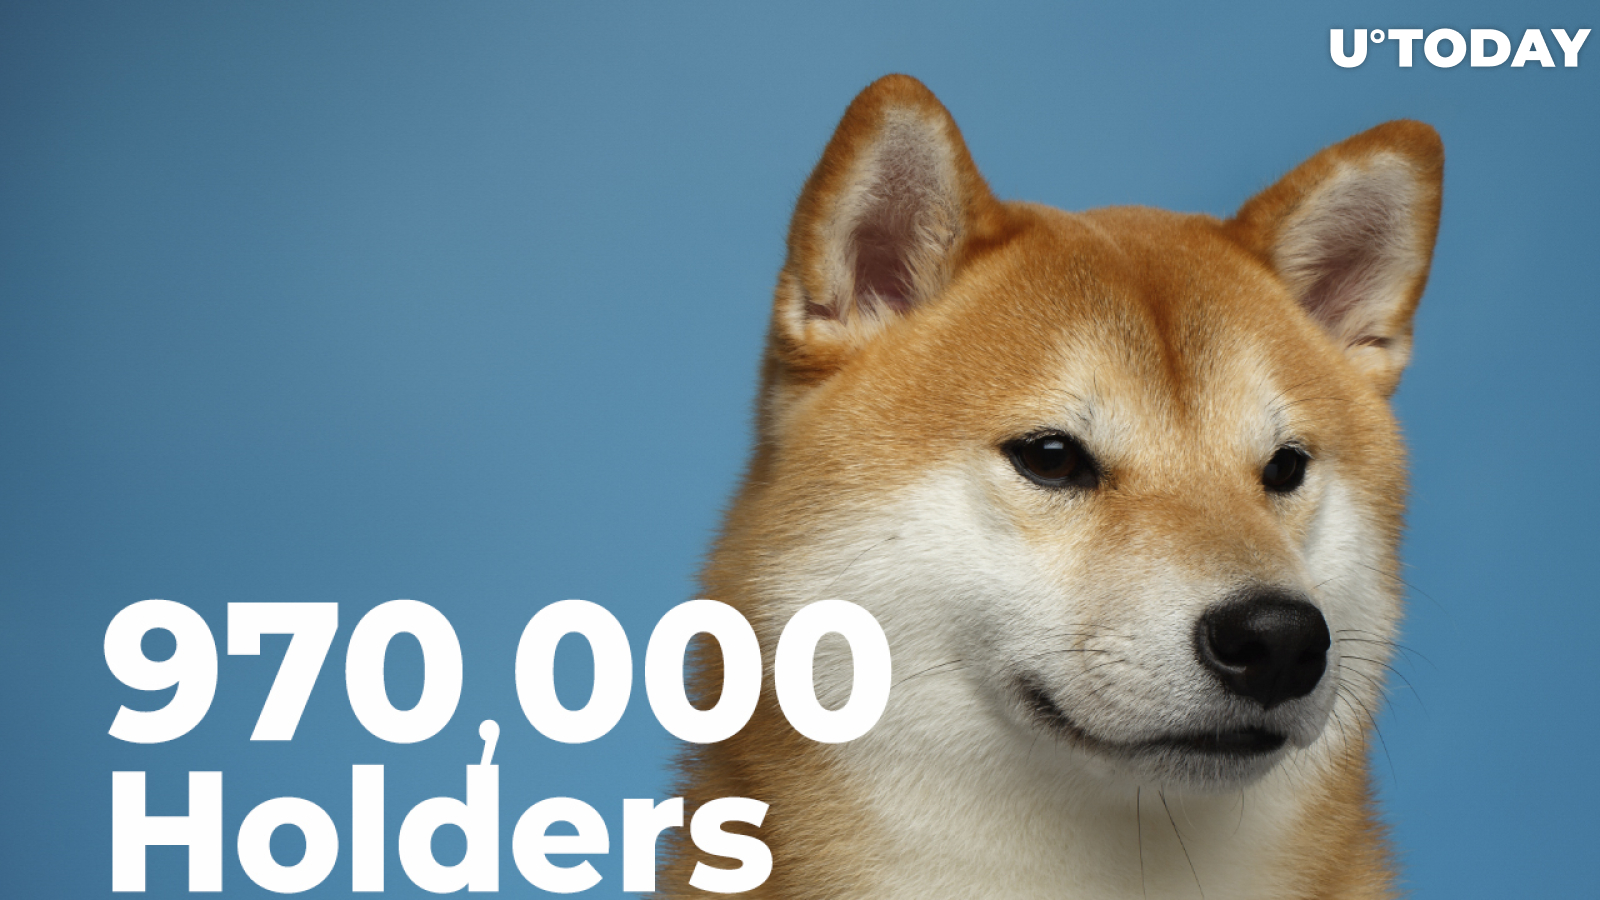 Shiba Inu Passes New Record of 970,000 Holders